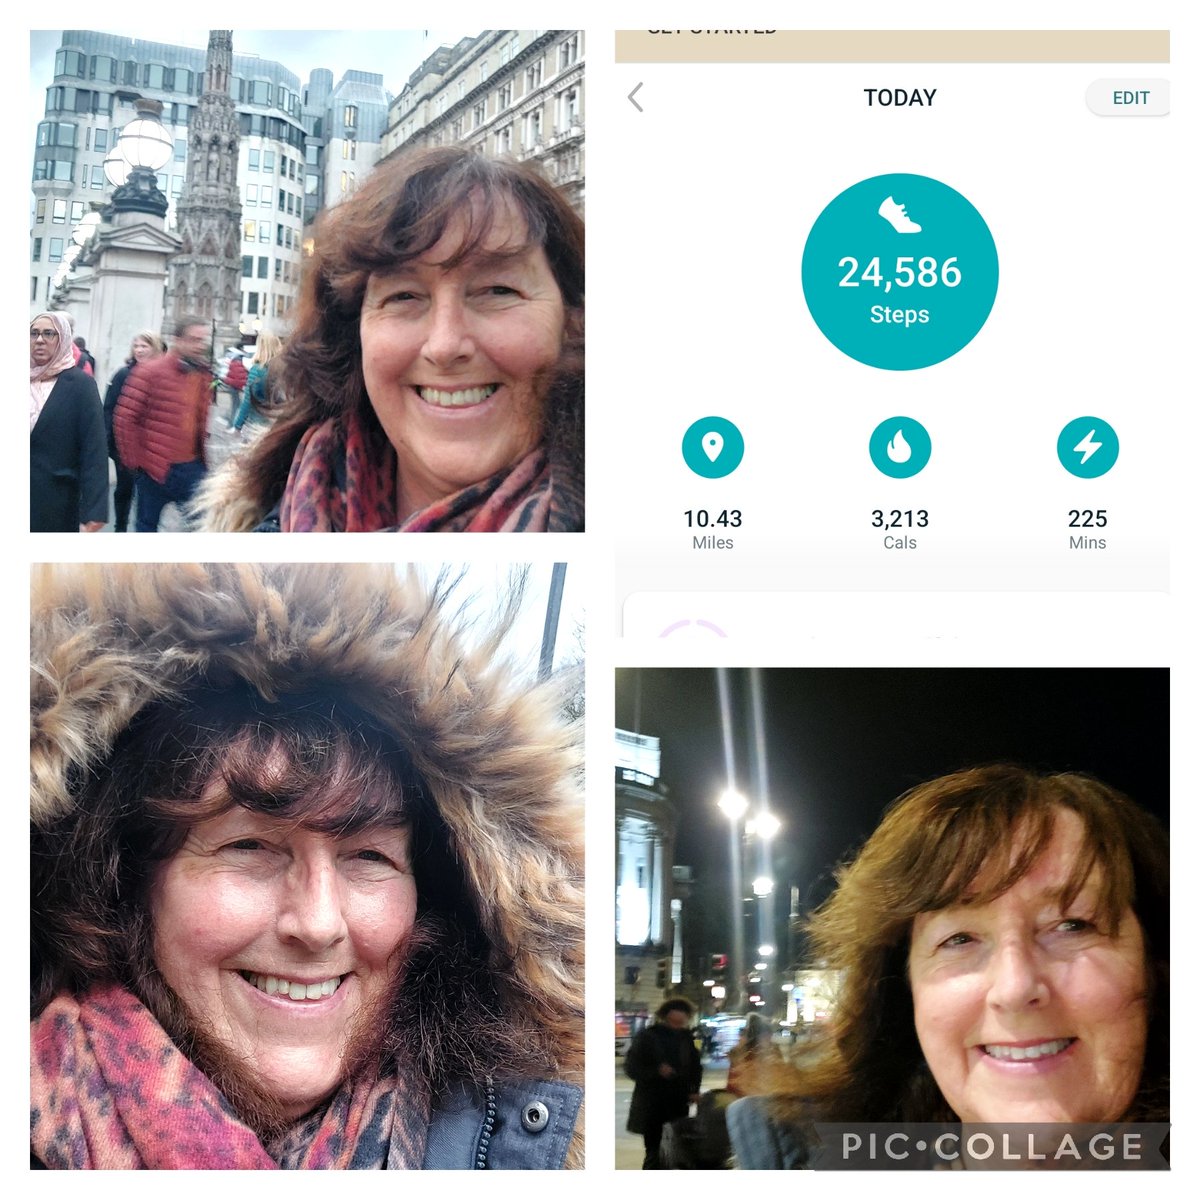 @CSSC_Official #AW23 #ActiveWellbeing exploring London on Saturday certainly helped increase my step count. 😊